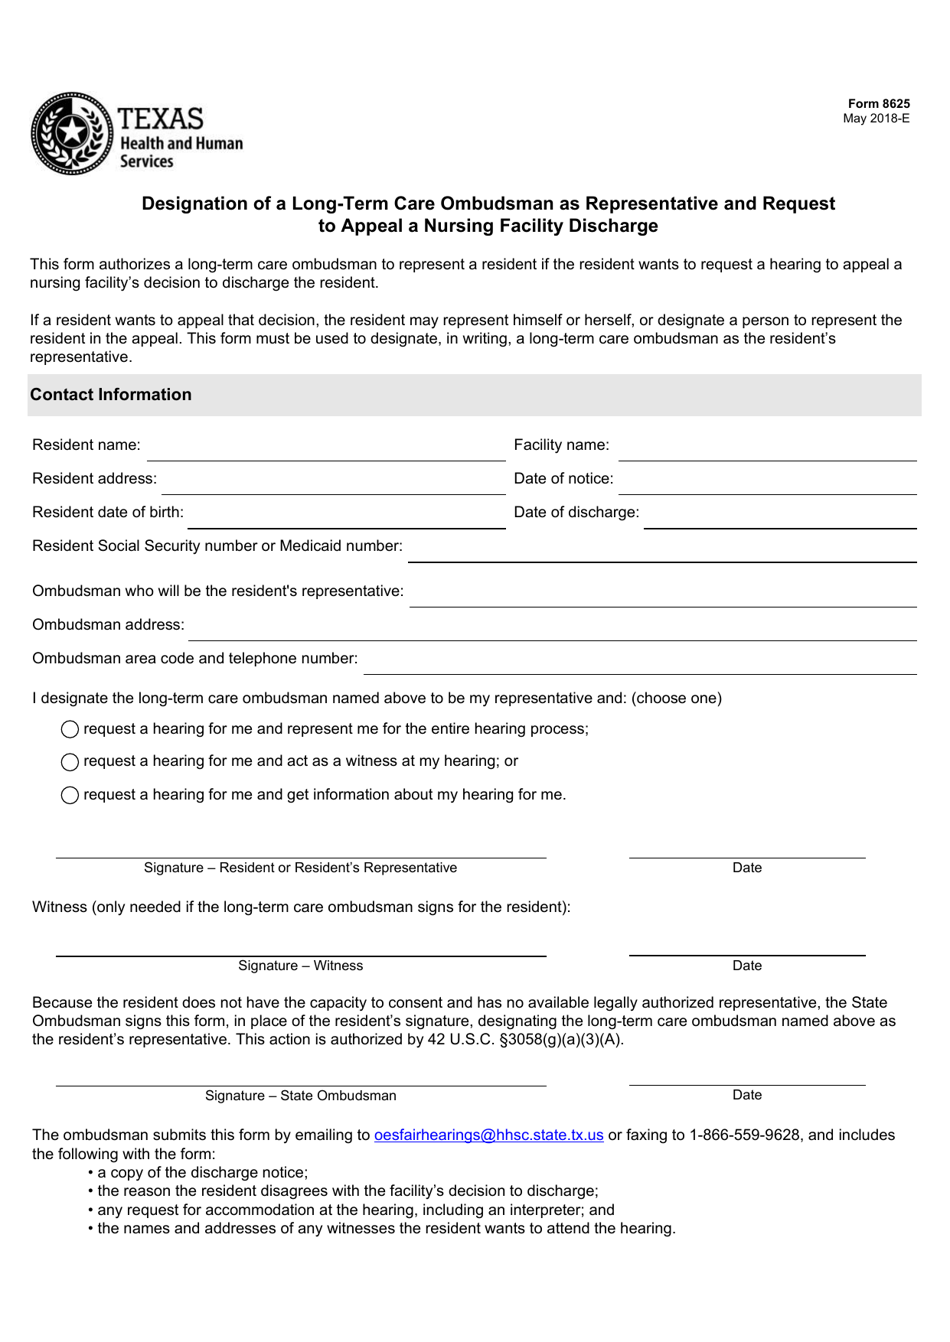 Form 8525 Designation of a Long-Term Care Ombudsman as Representative and Request to Appeal a Nursing Facility Discharge - Texas, Page 1